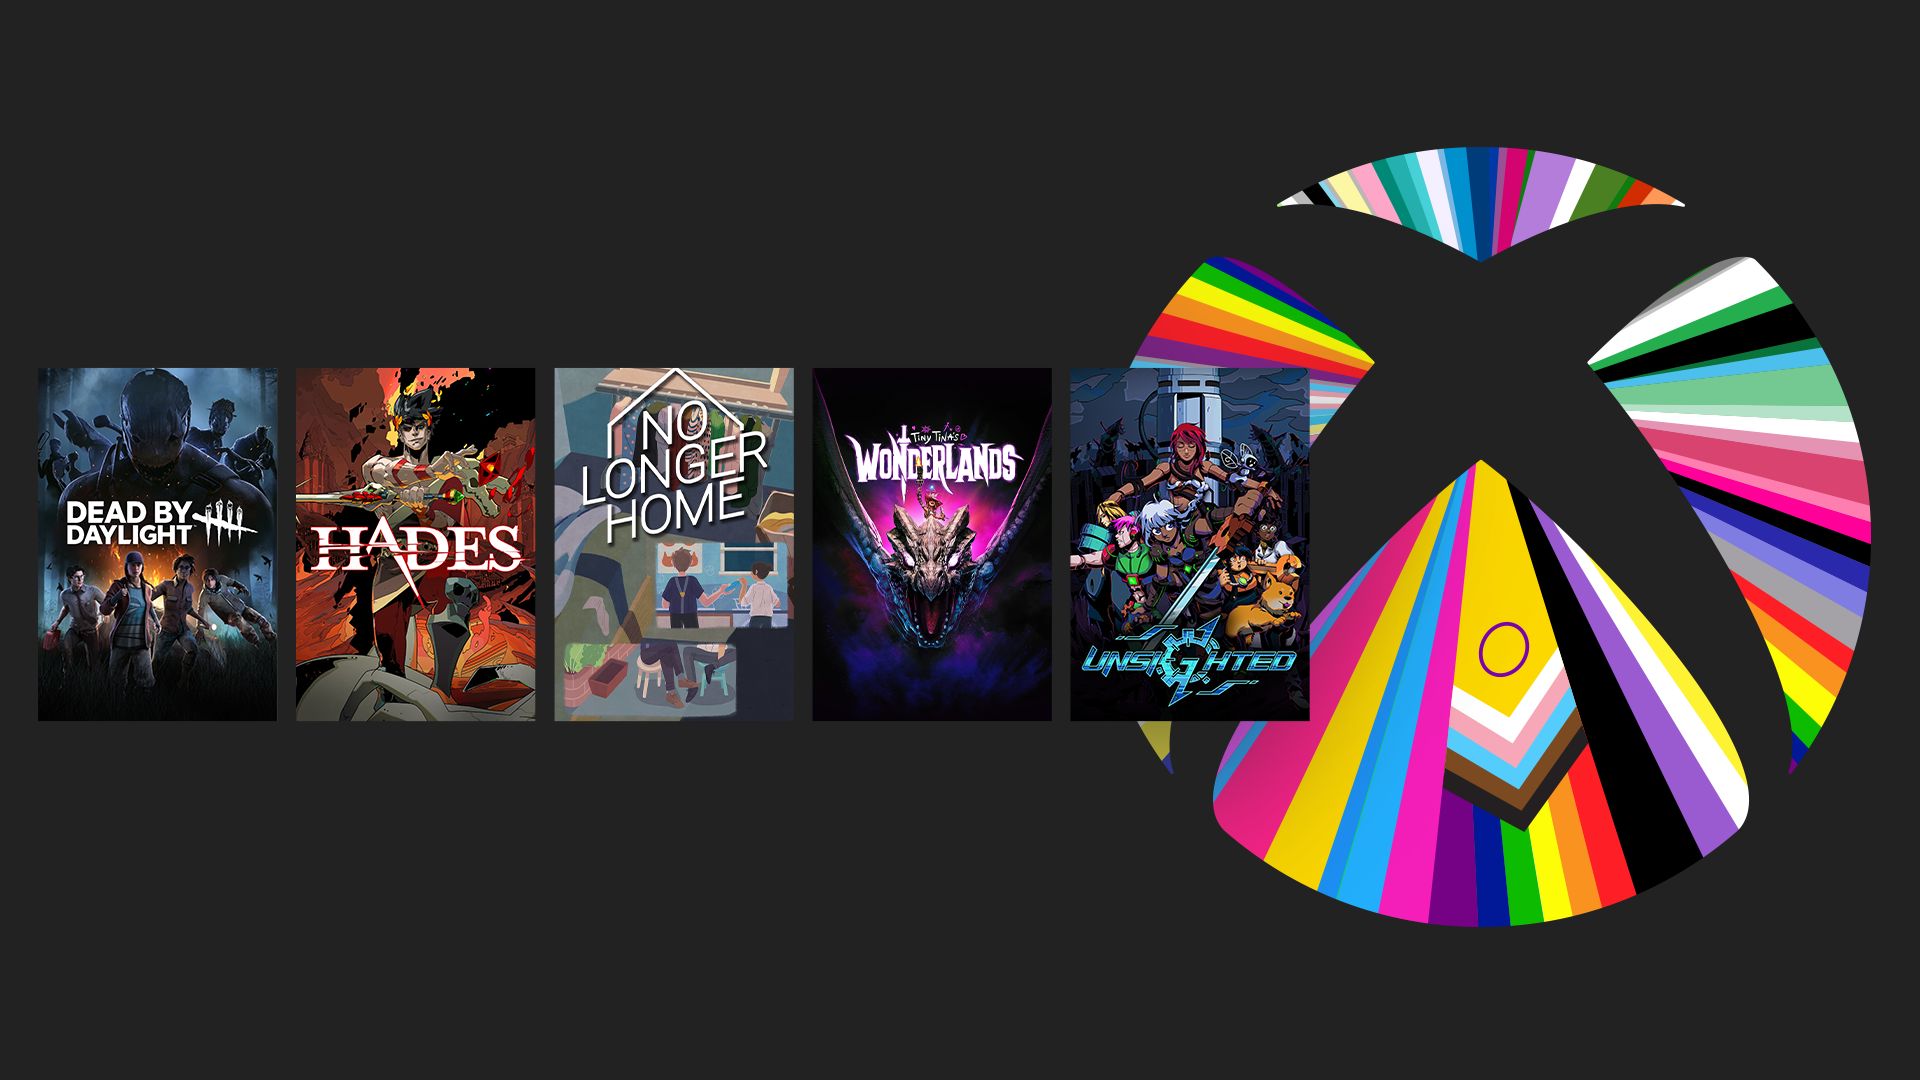 Xbox games image feature game art from Dead by Daylight, Hades, No Longer Home, Tiny Tina’s Wonderland and Unsighted.